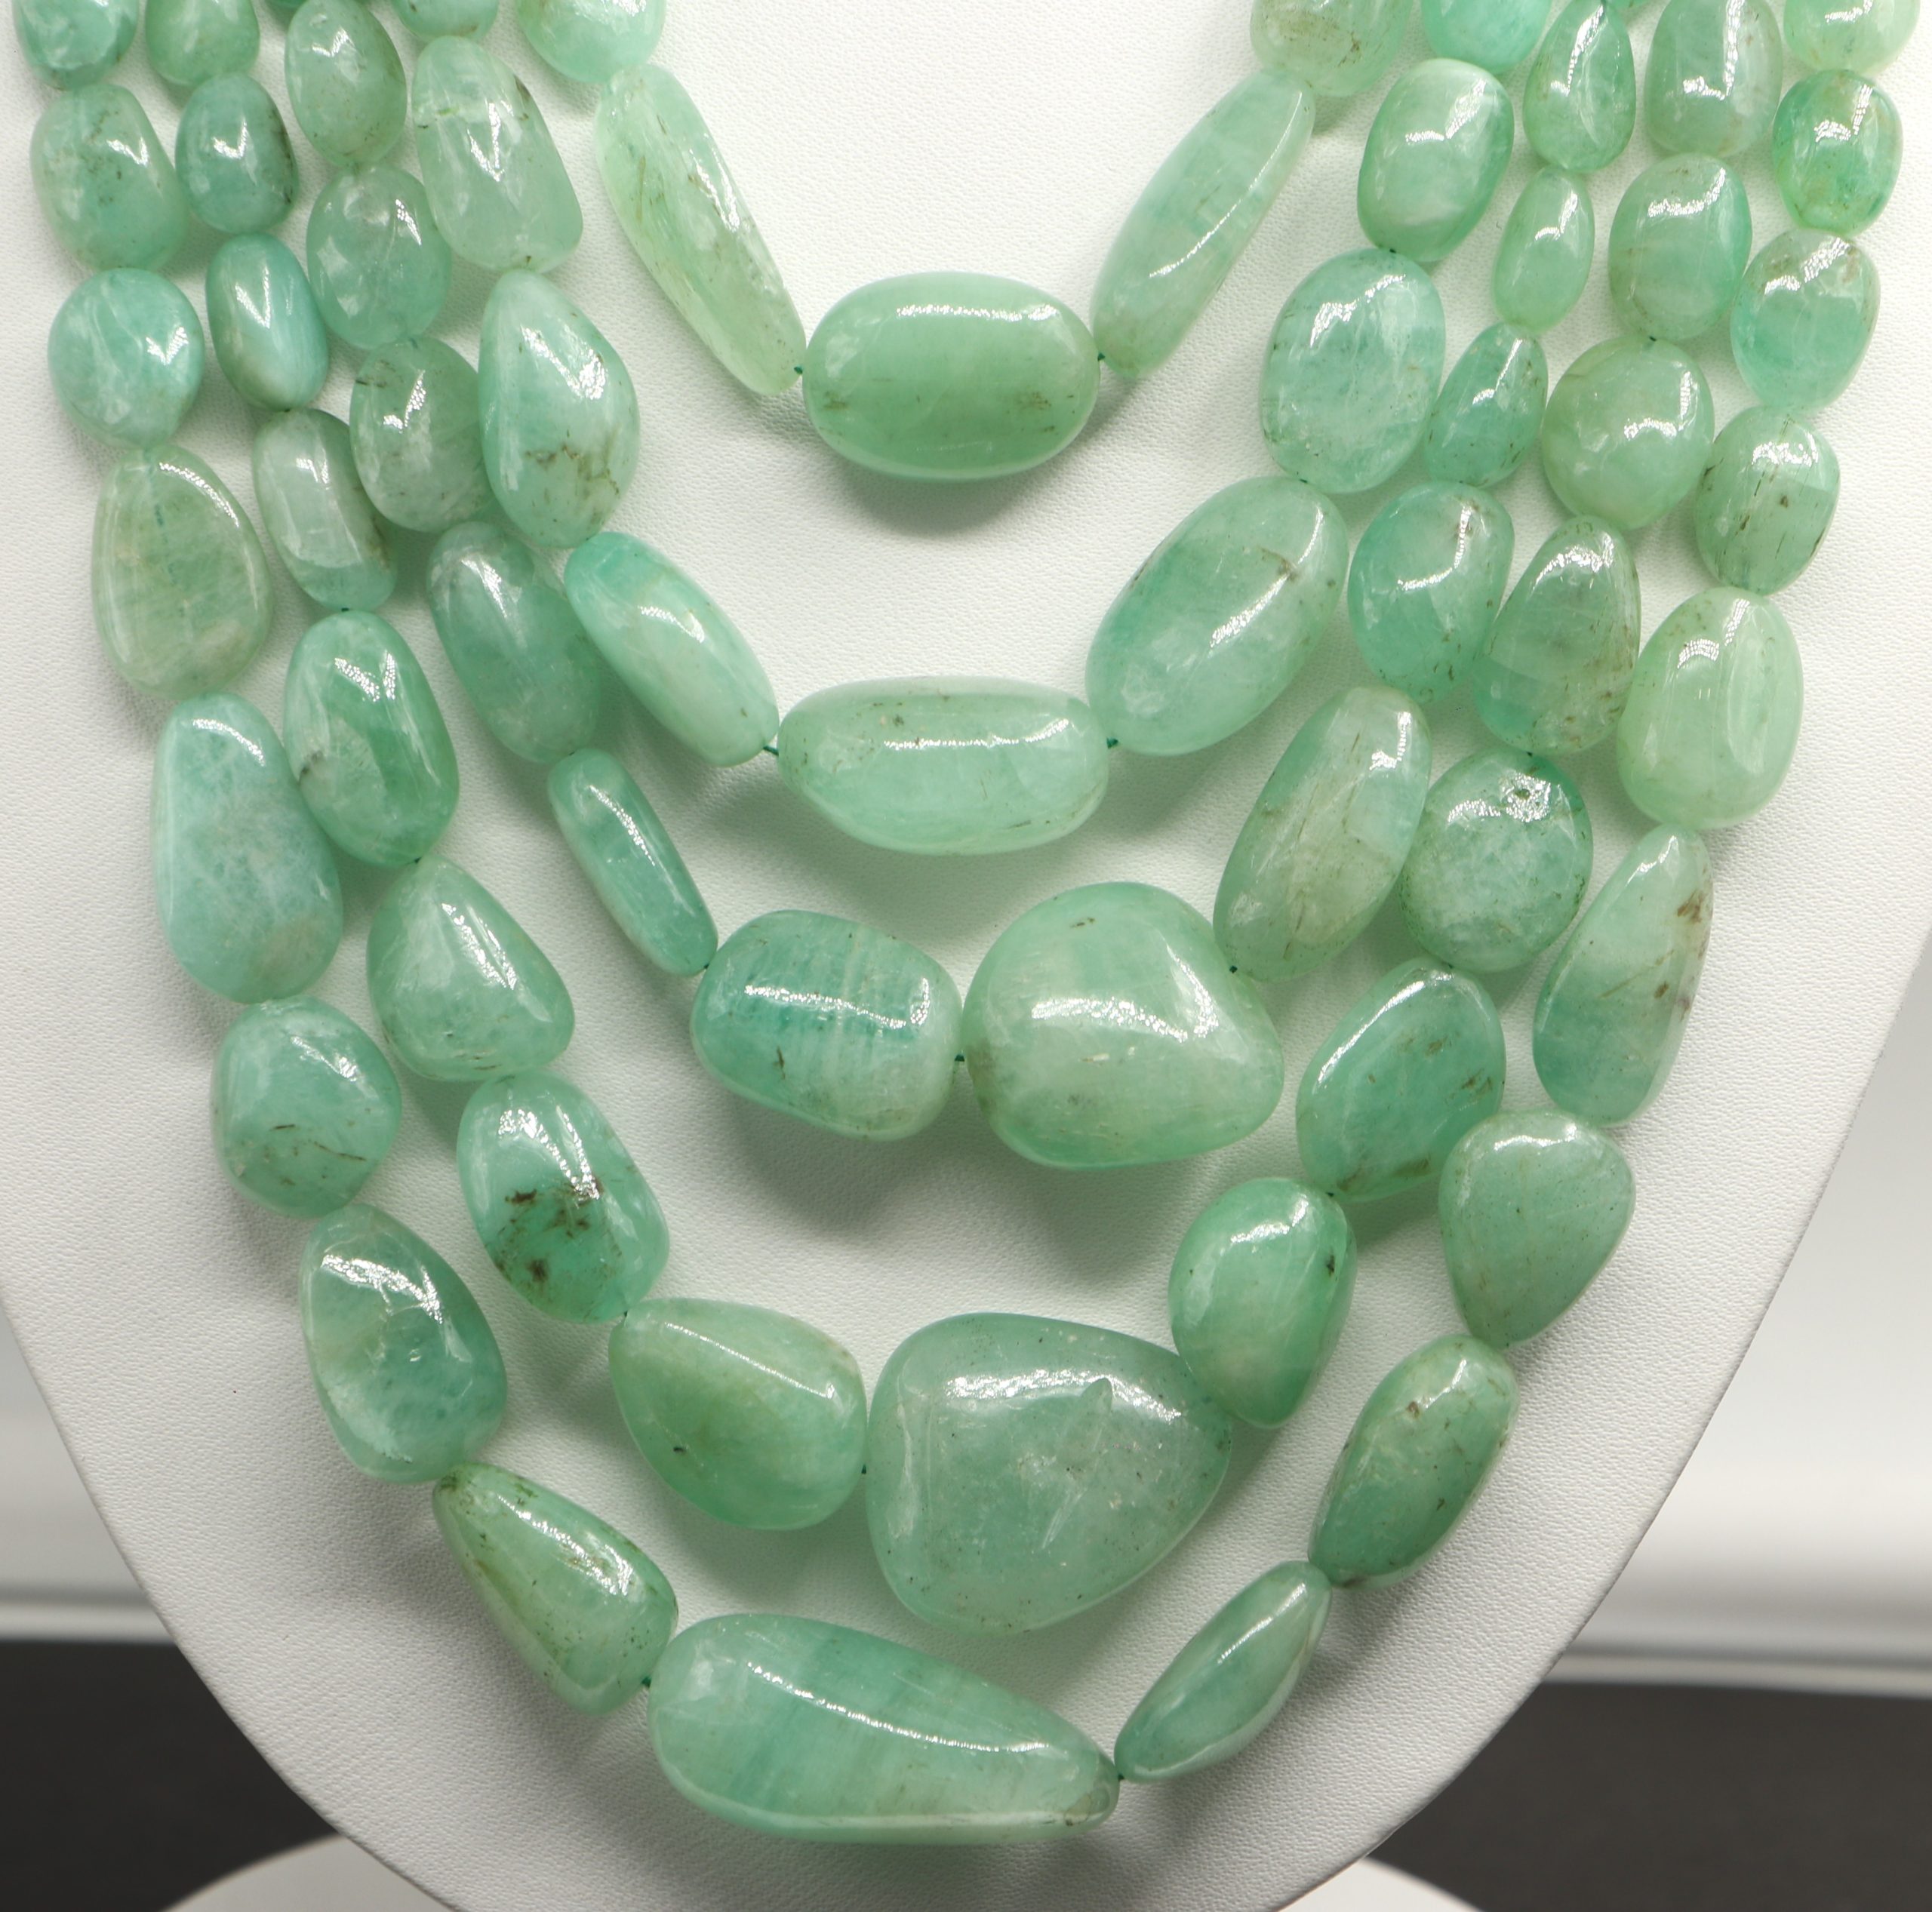 Green Emerald Smooth Tumble Gemstone Beads Semi Precious natural Emerald Nugget Shape, 8 Strand For Jewelry Making